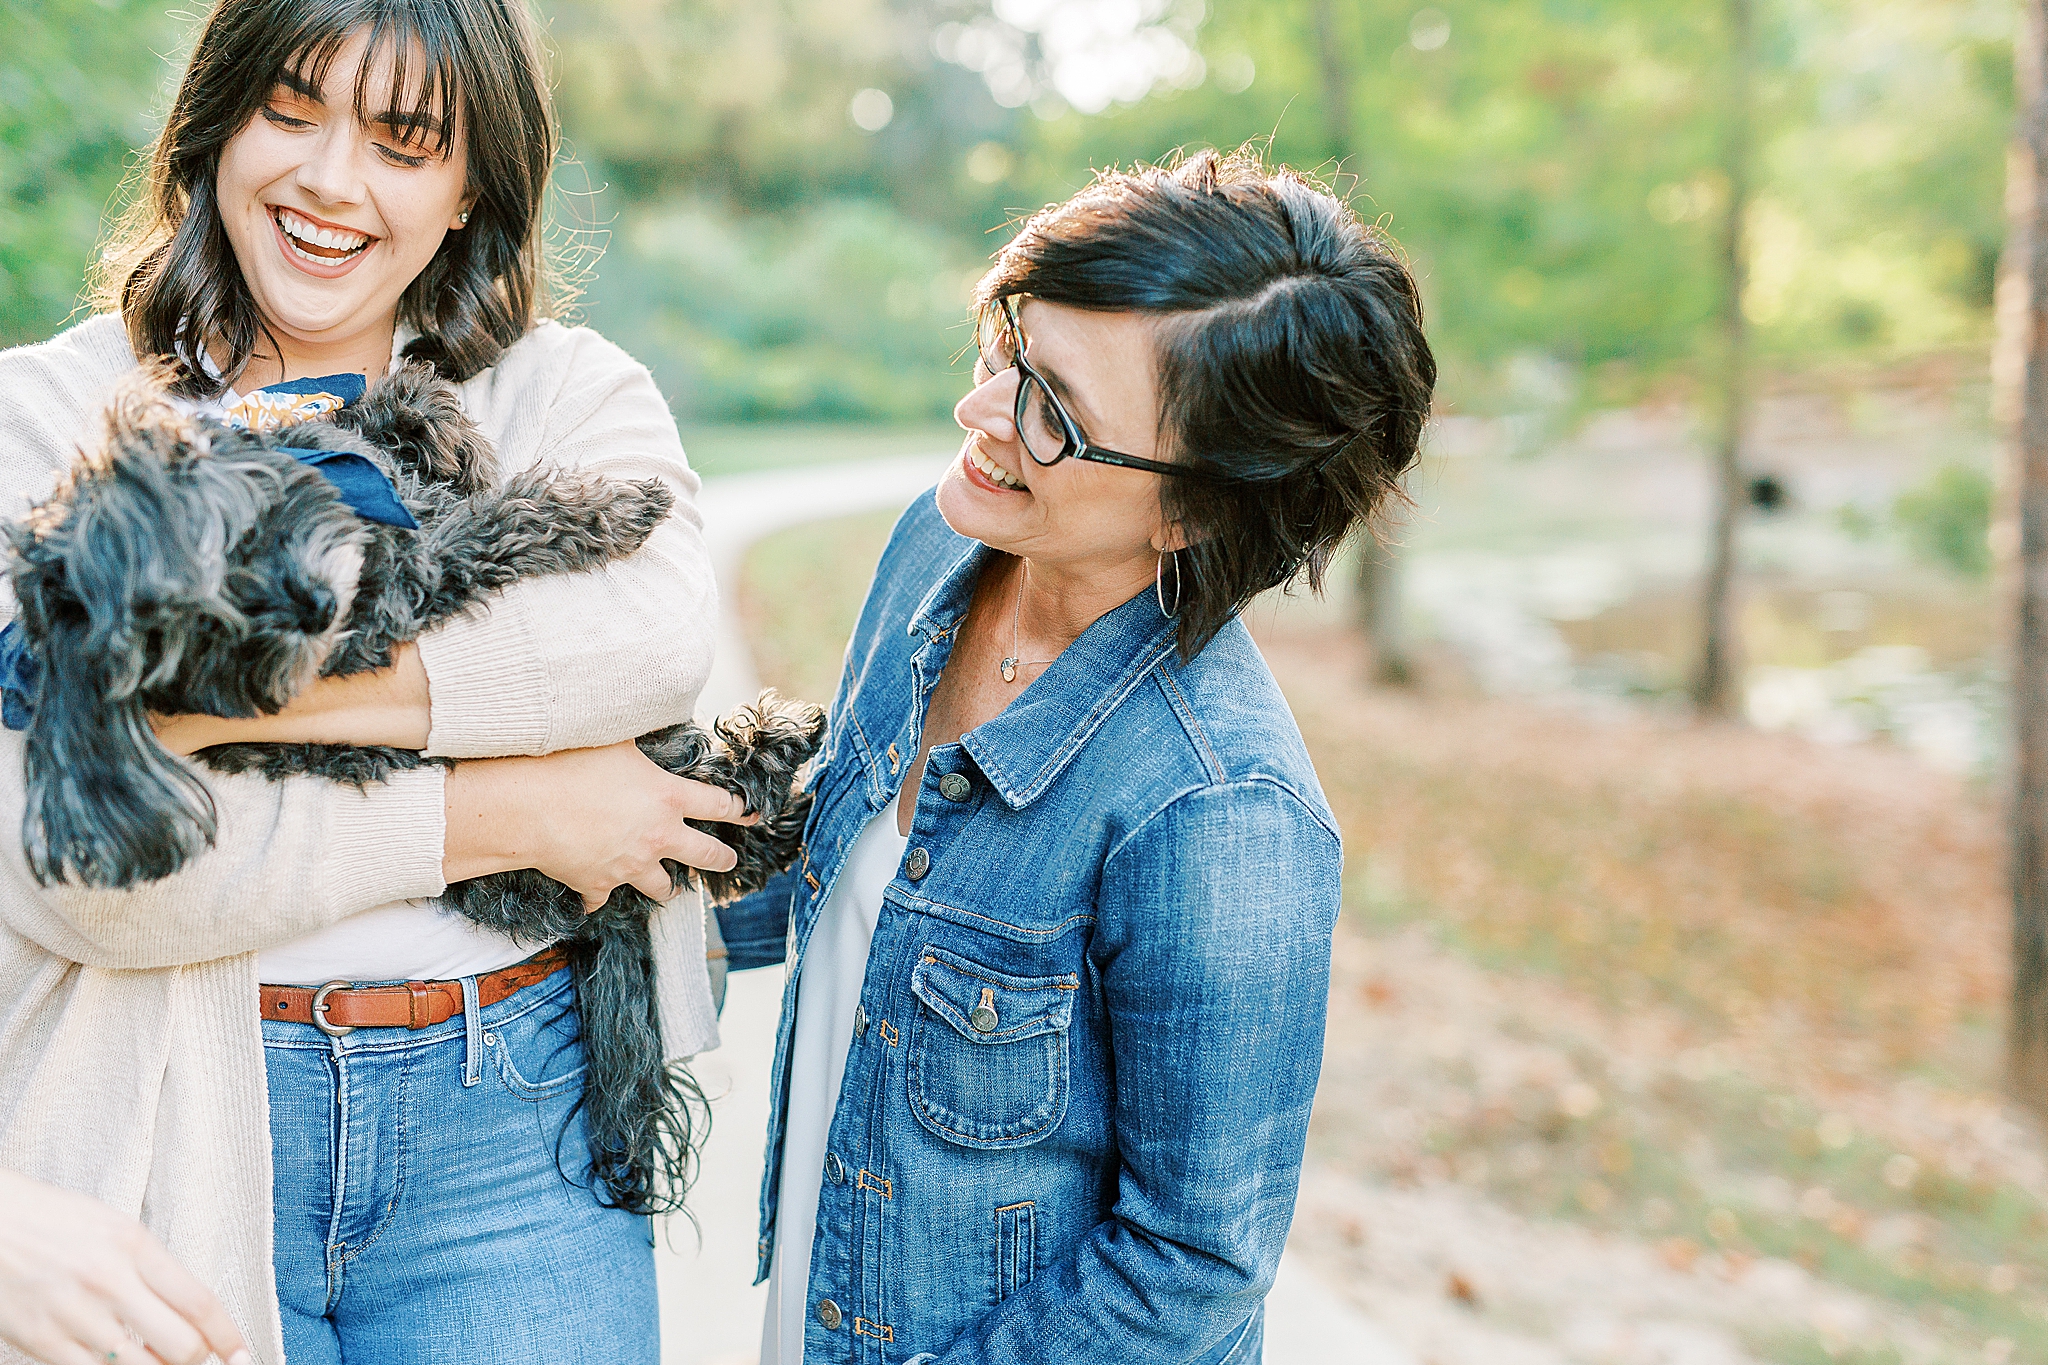 mom looks at small dog in daughter's arms